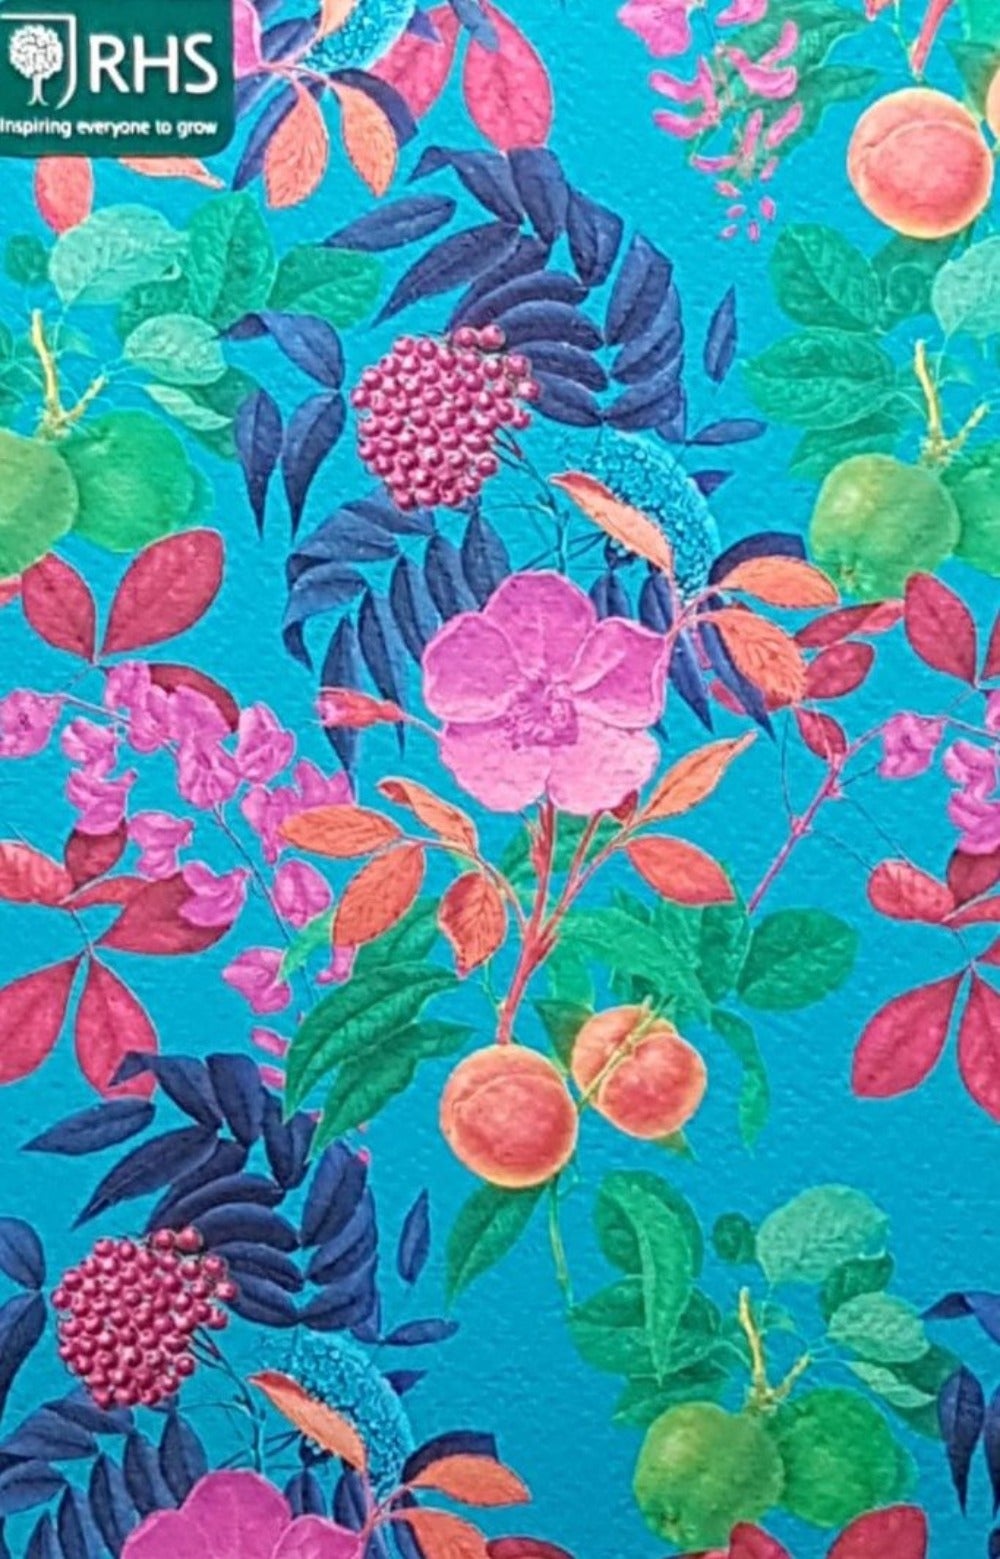 Blank Card - A Colourful Fruit On Branches On A Blue Background